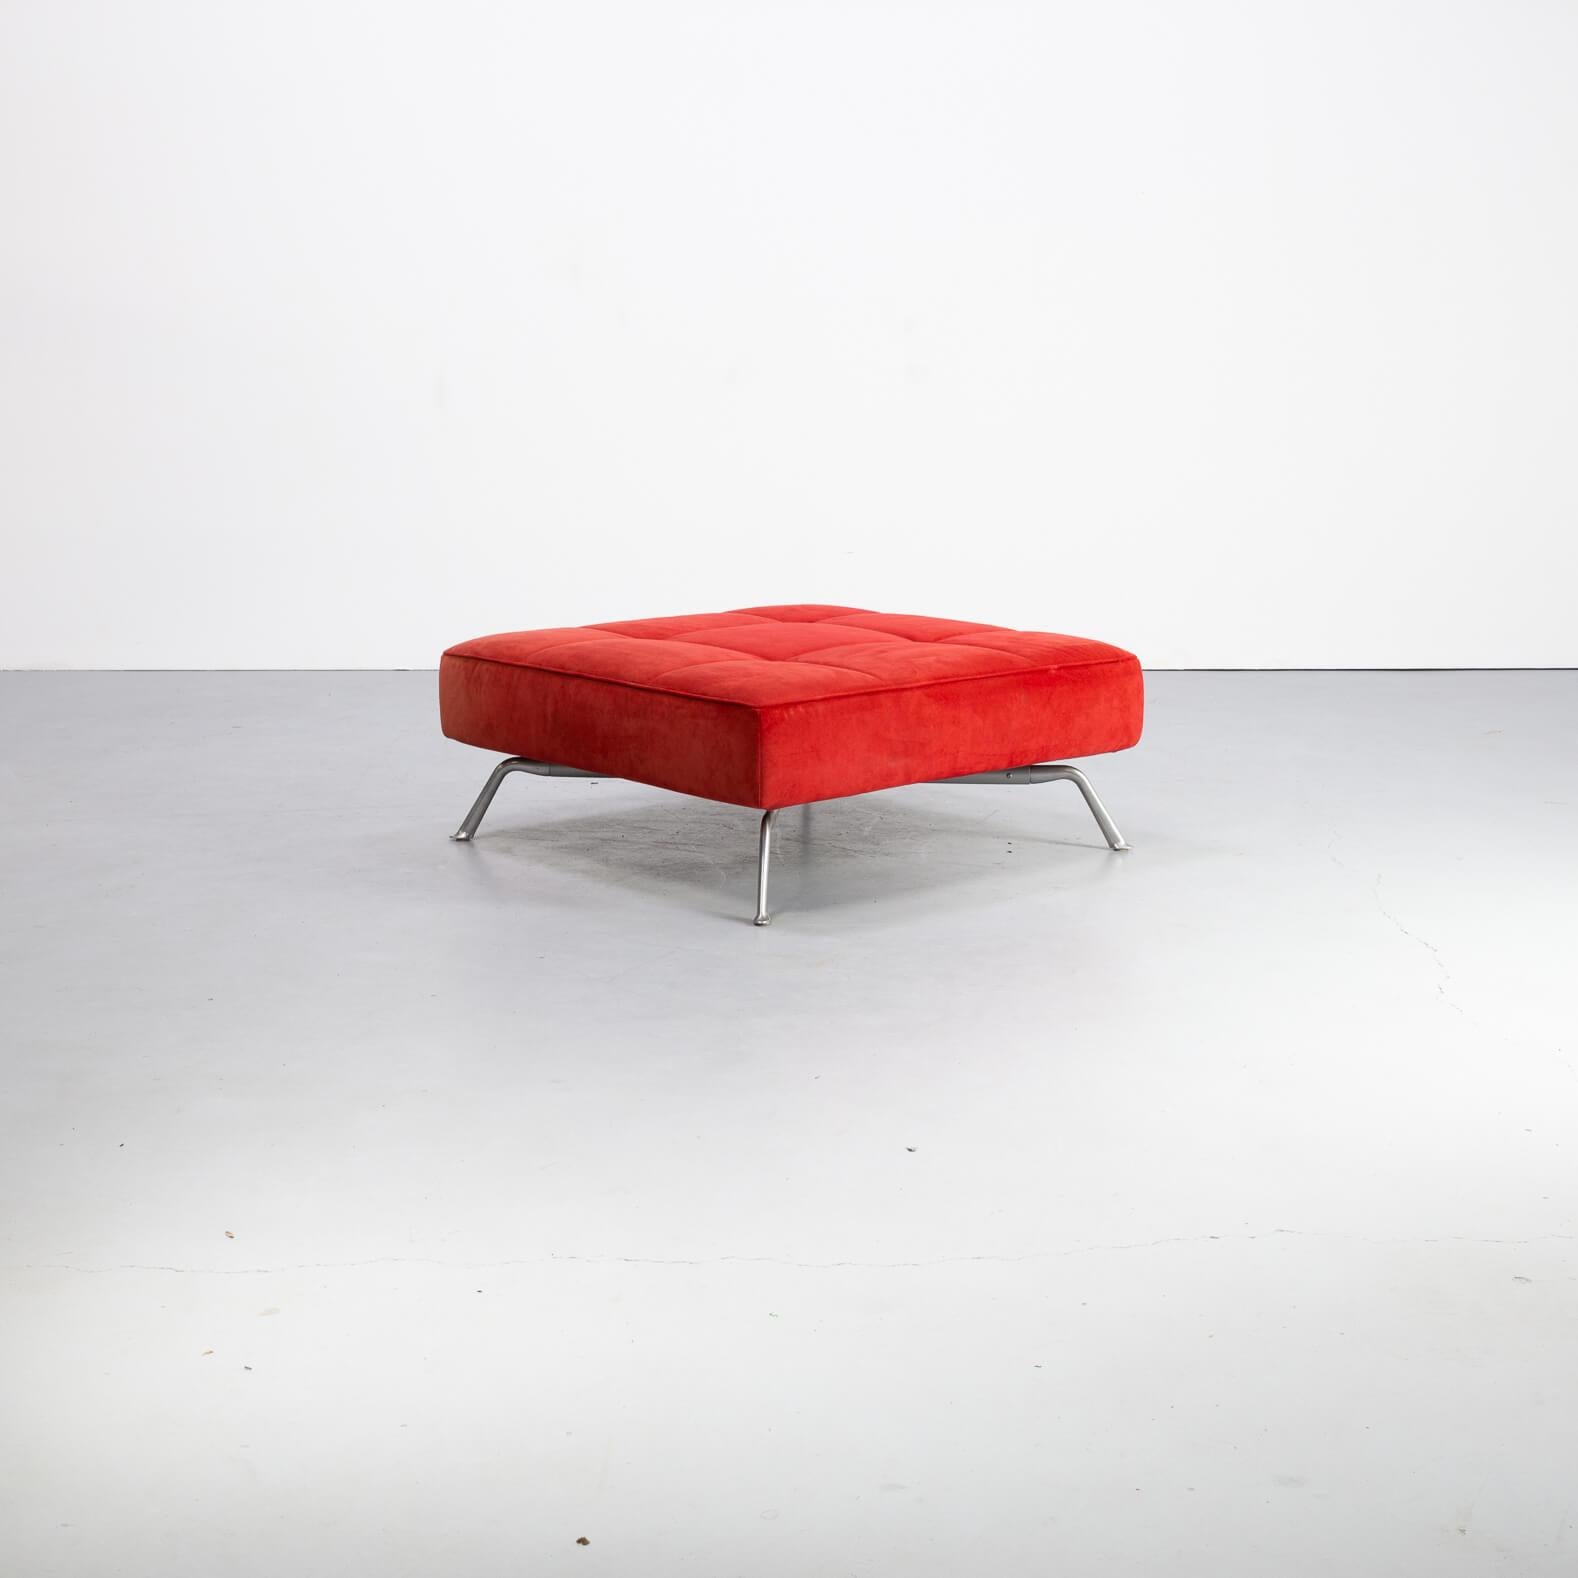 Pascal Mourgue designed the Smala as a practical settee with pure, clean lines which all but floats above the ground, inviting you to come up and relax. This footstool is very comfortable to sit and relax on. Good condition consistent with age and